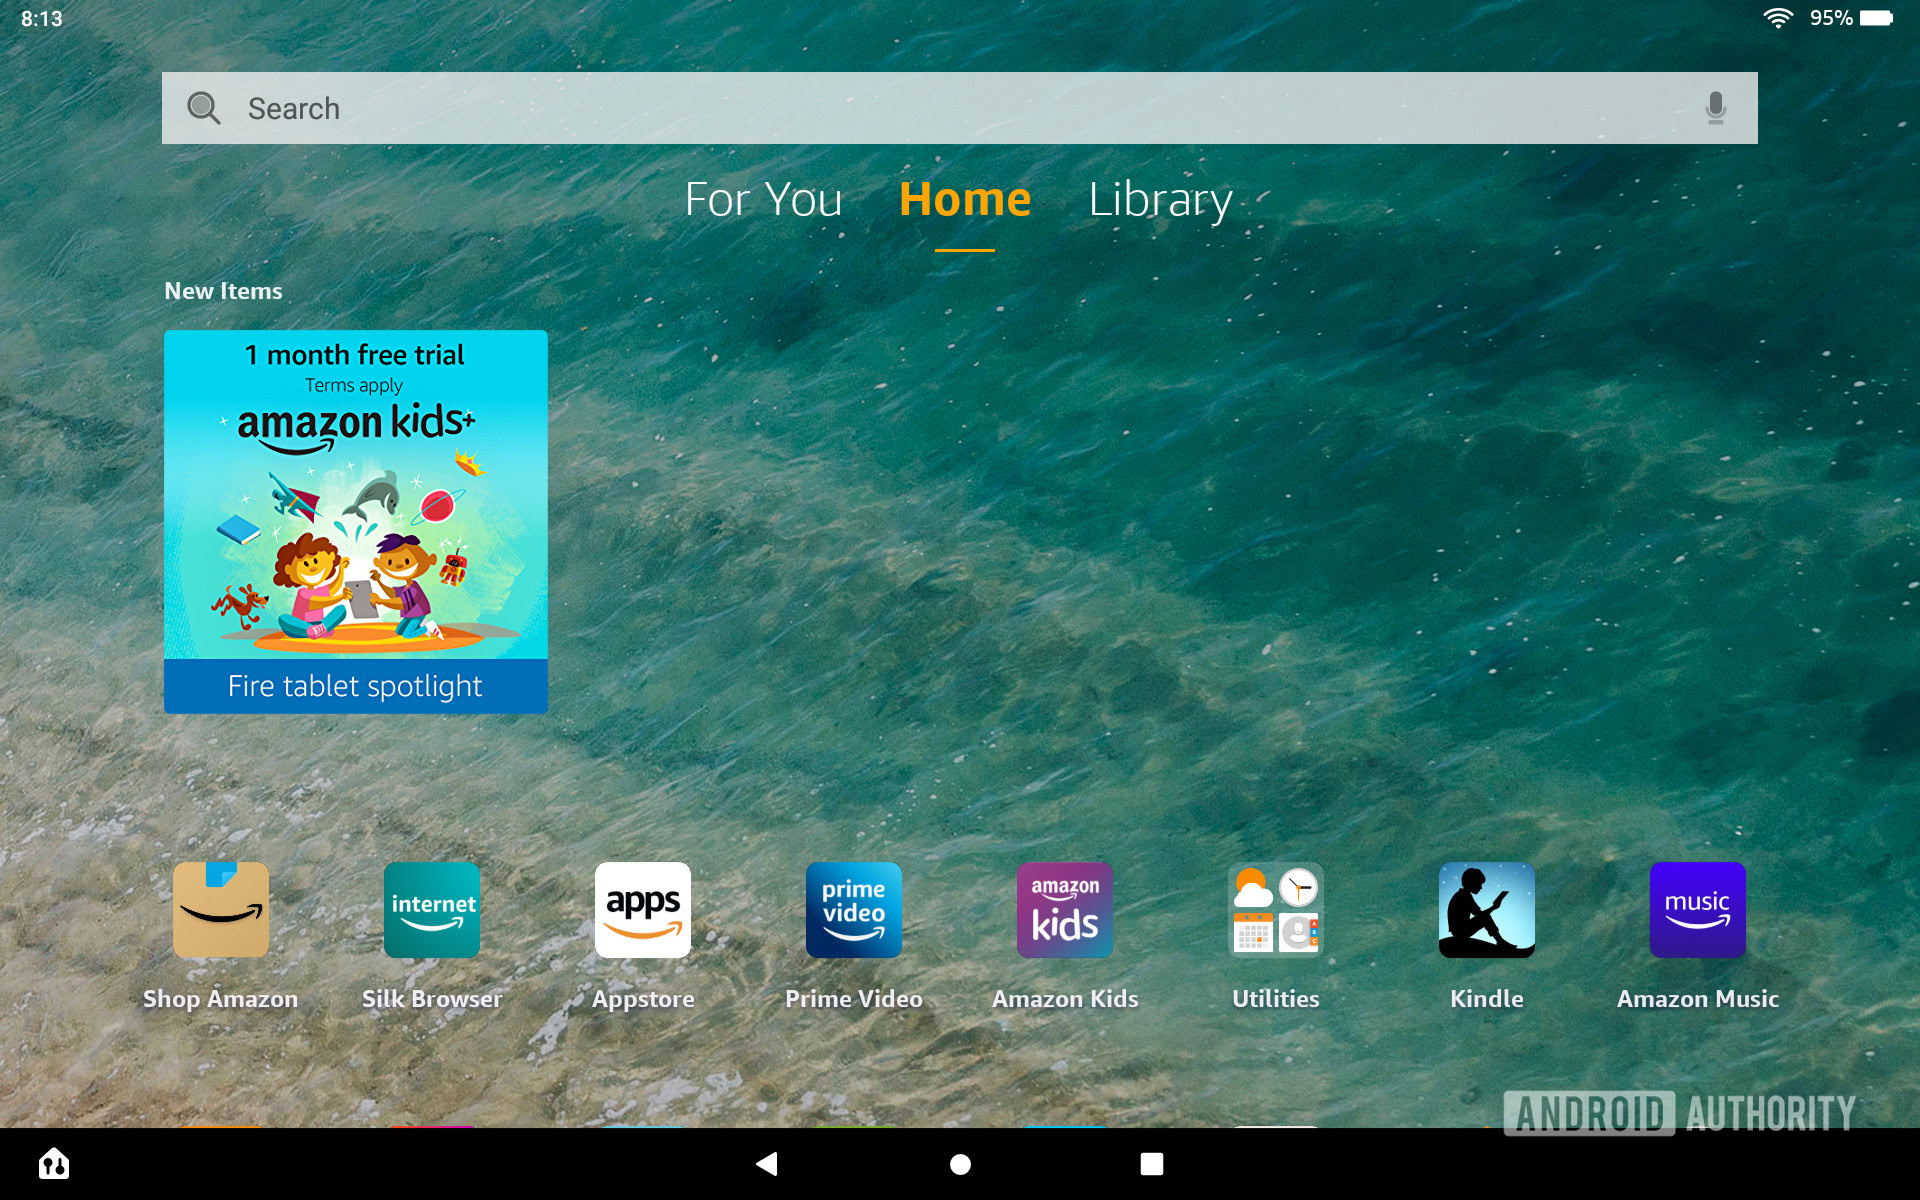 Amazon Fire HD 10 Plus home screen with app suggestion